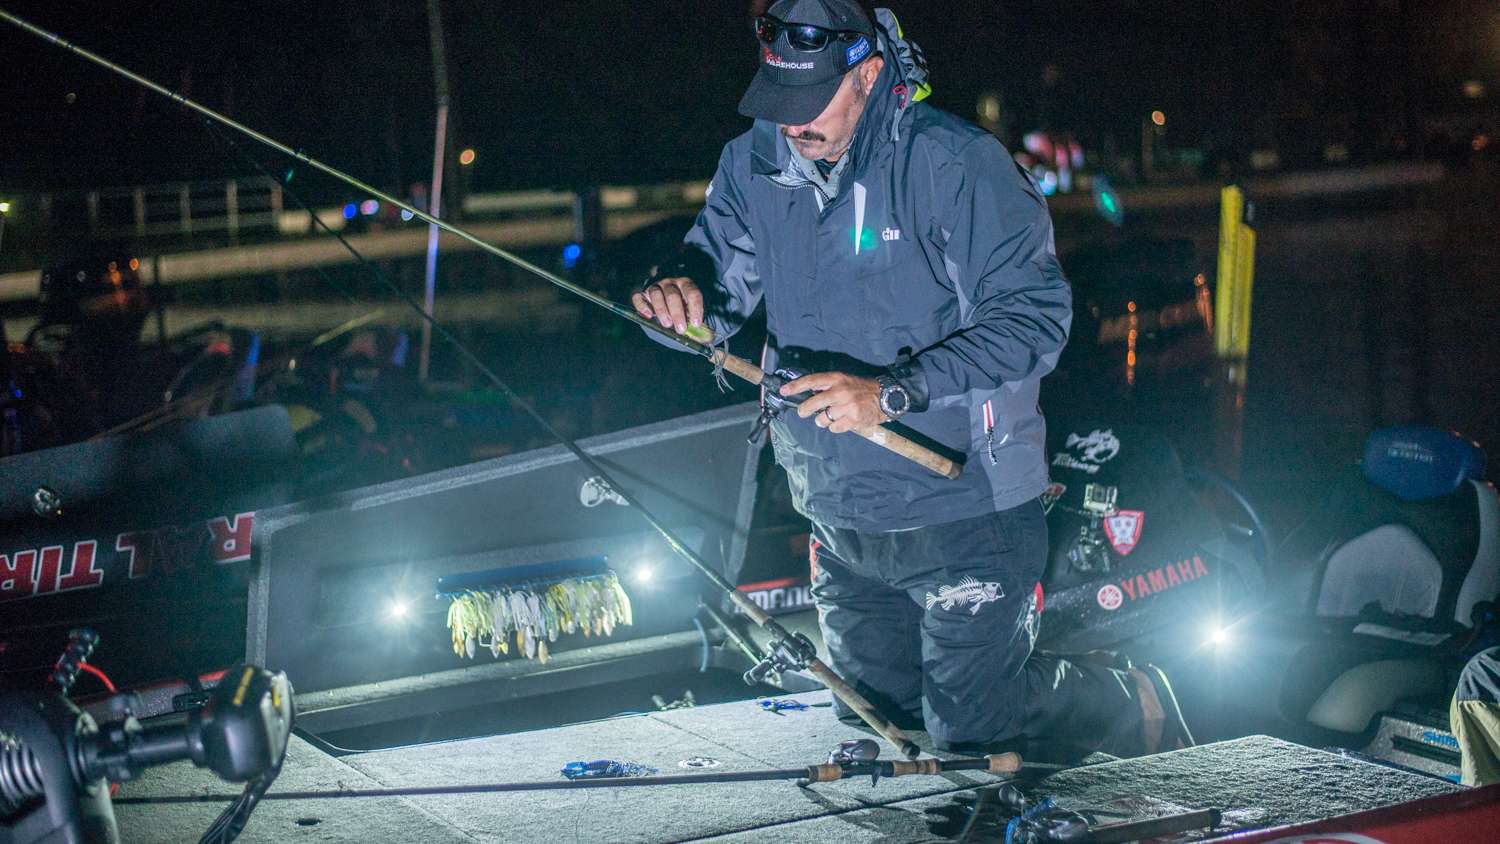 Lintner hooks his bait to the rod and spins his line around the rod to keep everything neat. 
